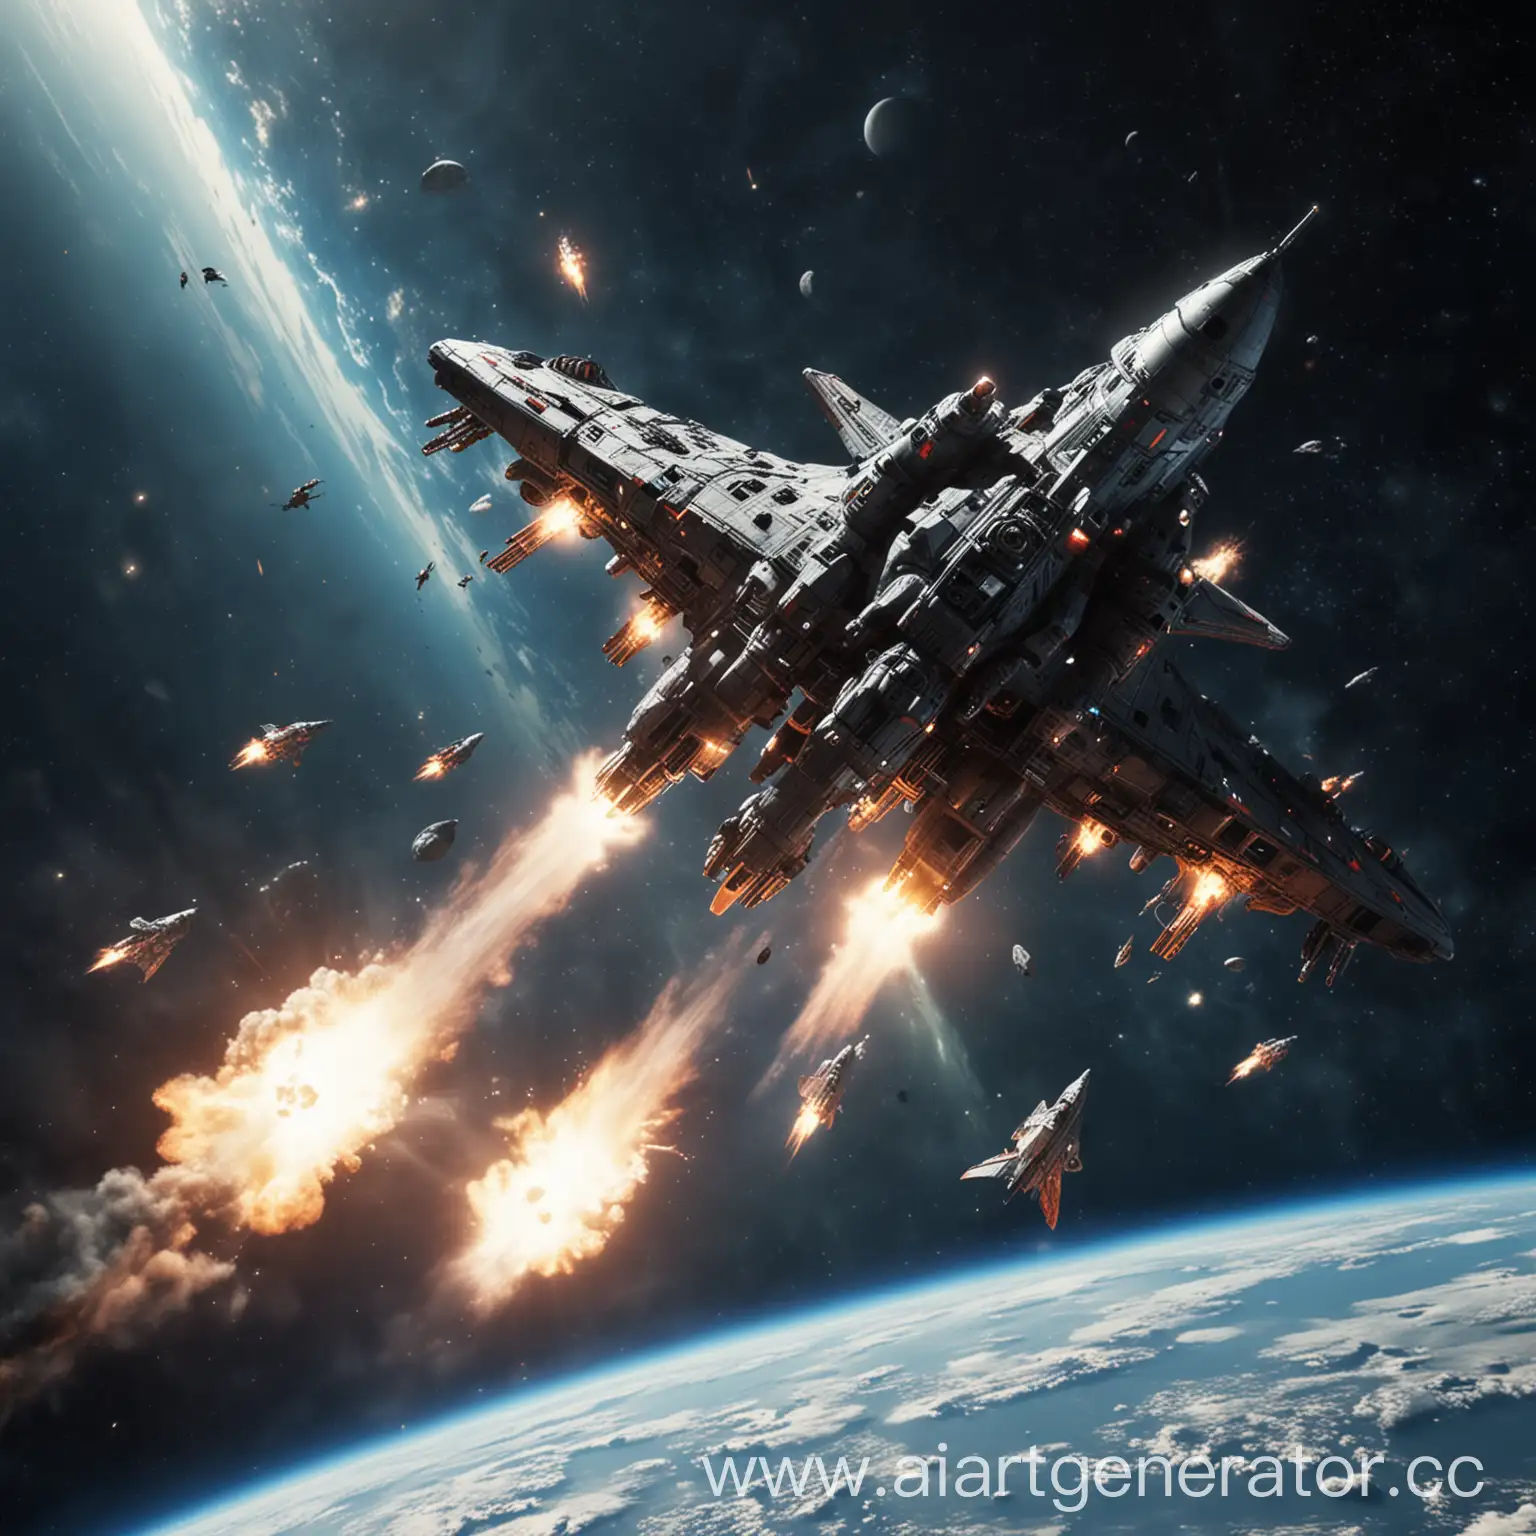 Intense-Space-Battle-Combat-Spaceship-Fires-in-the-Foreground